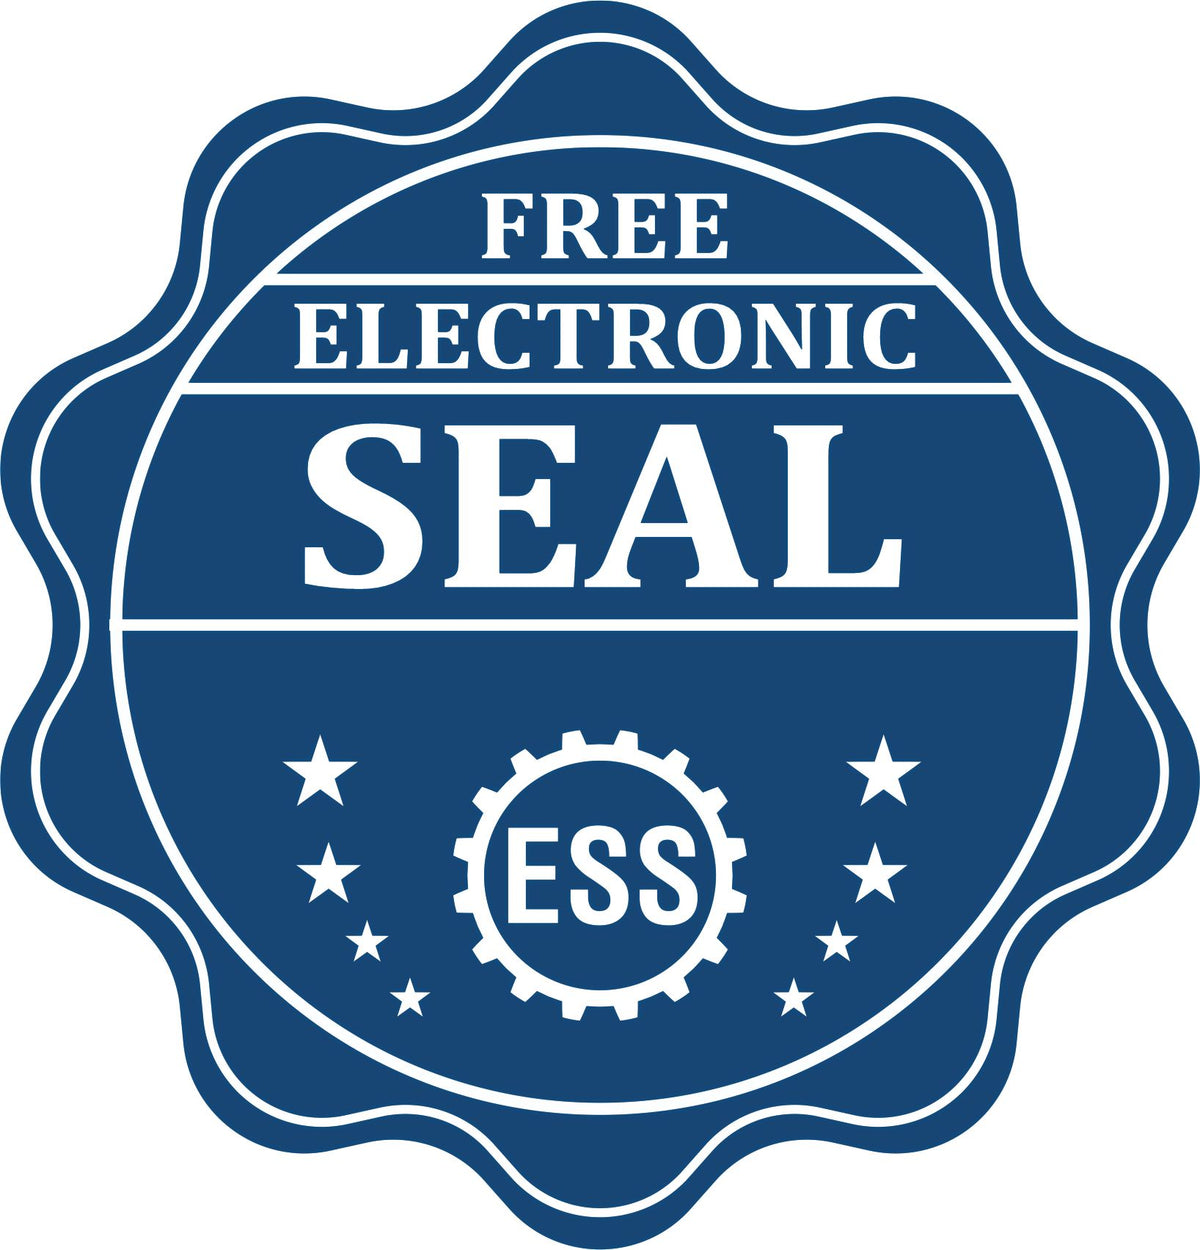 A badge showing a free electronic seal for the Soft Pocket New Mexico Landscape Architect Embosser with stars and the ESS gear on the emblem.